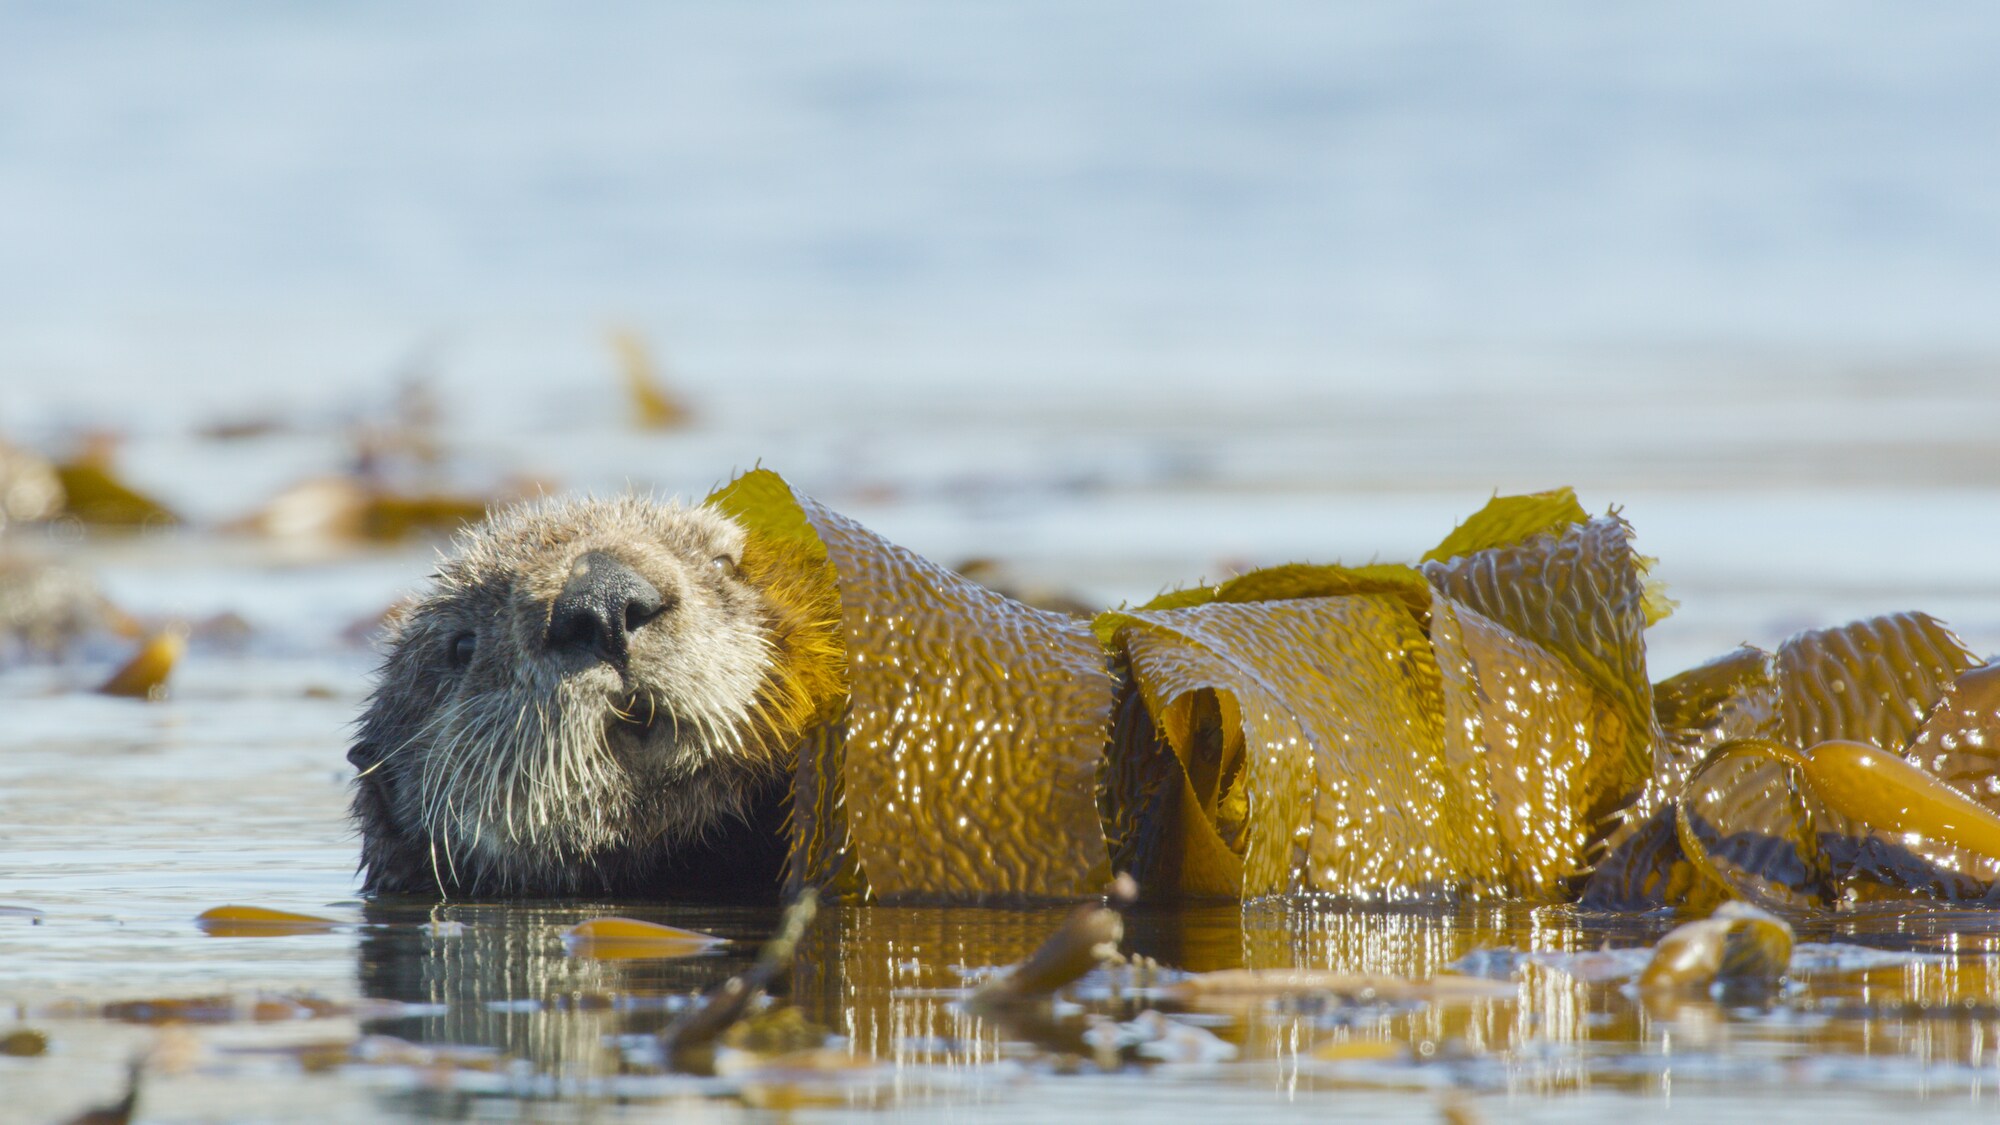 Sea otters wrap themselves and their pups up in giant kelp, to keep themselves from drifting out to sea. (National Geographic for Disney+)